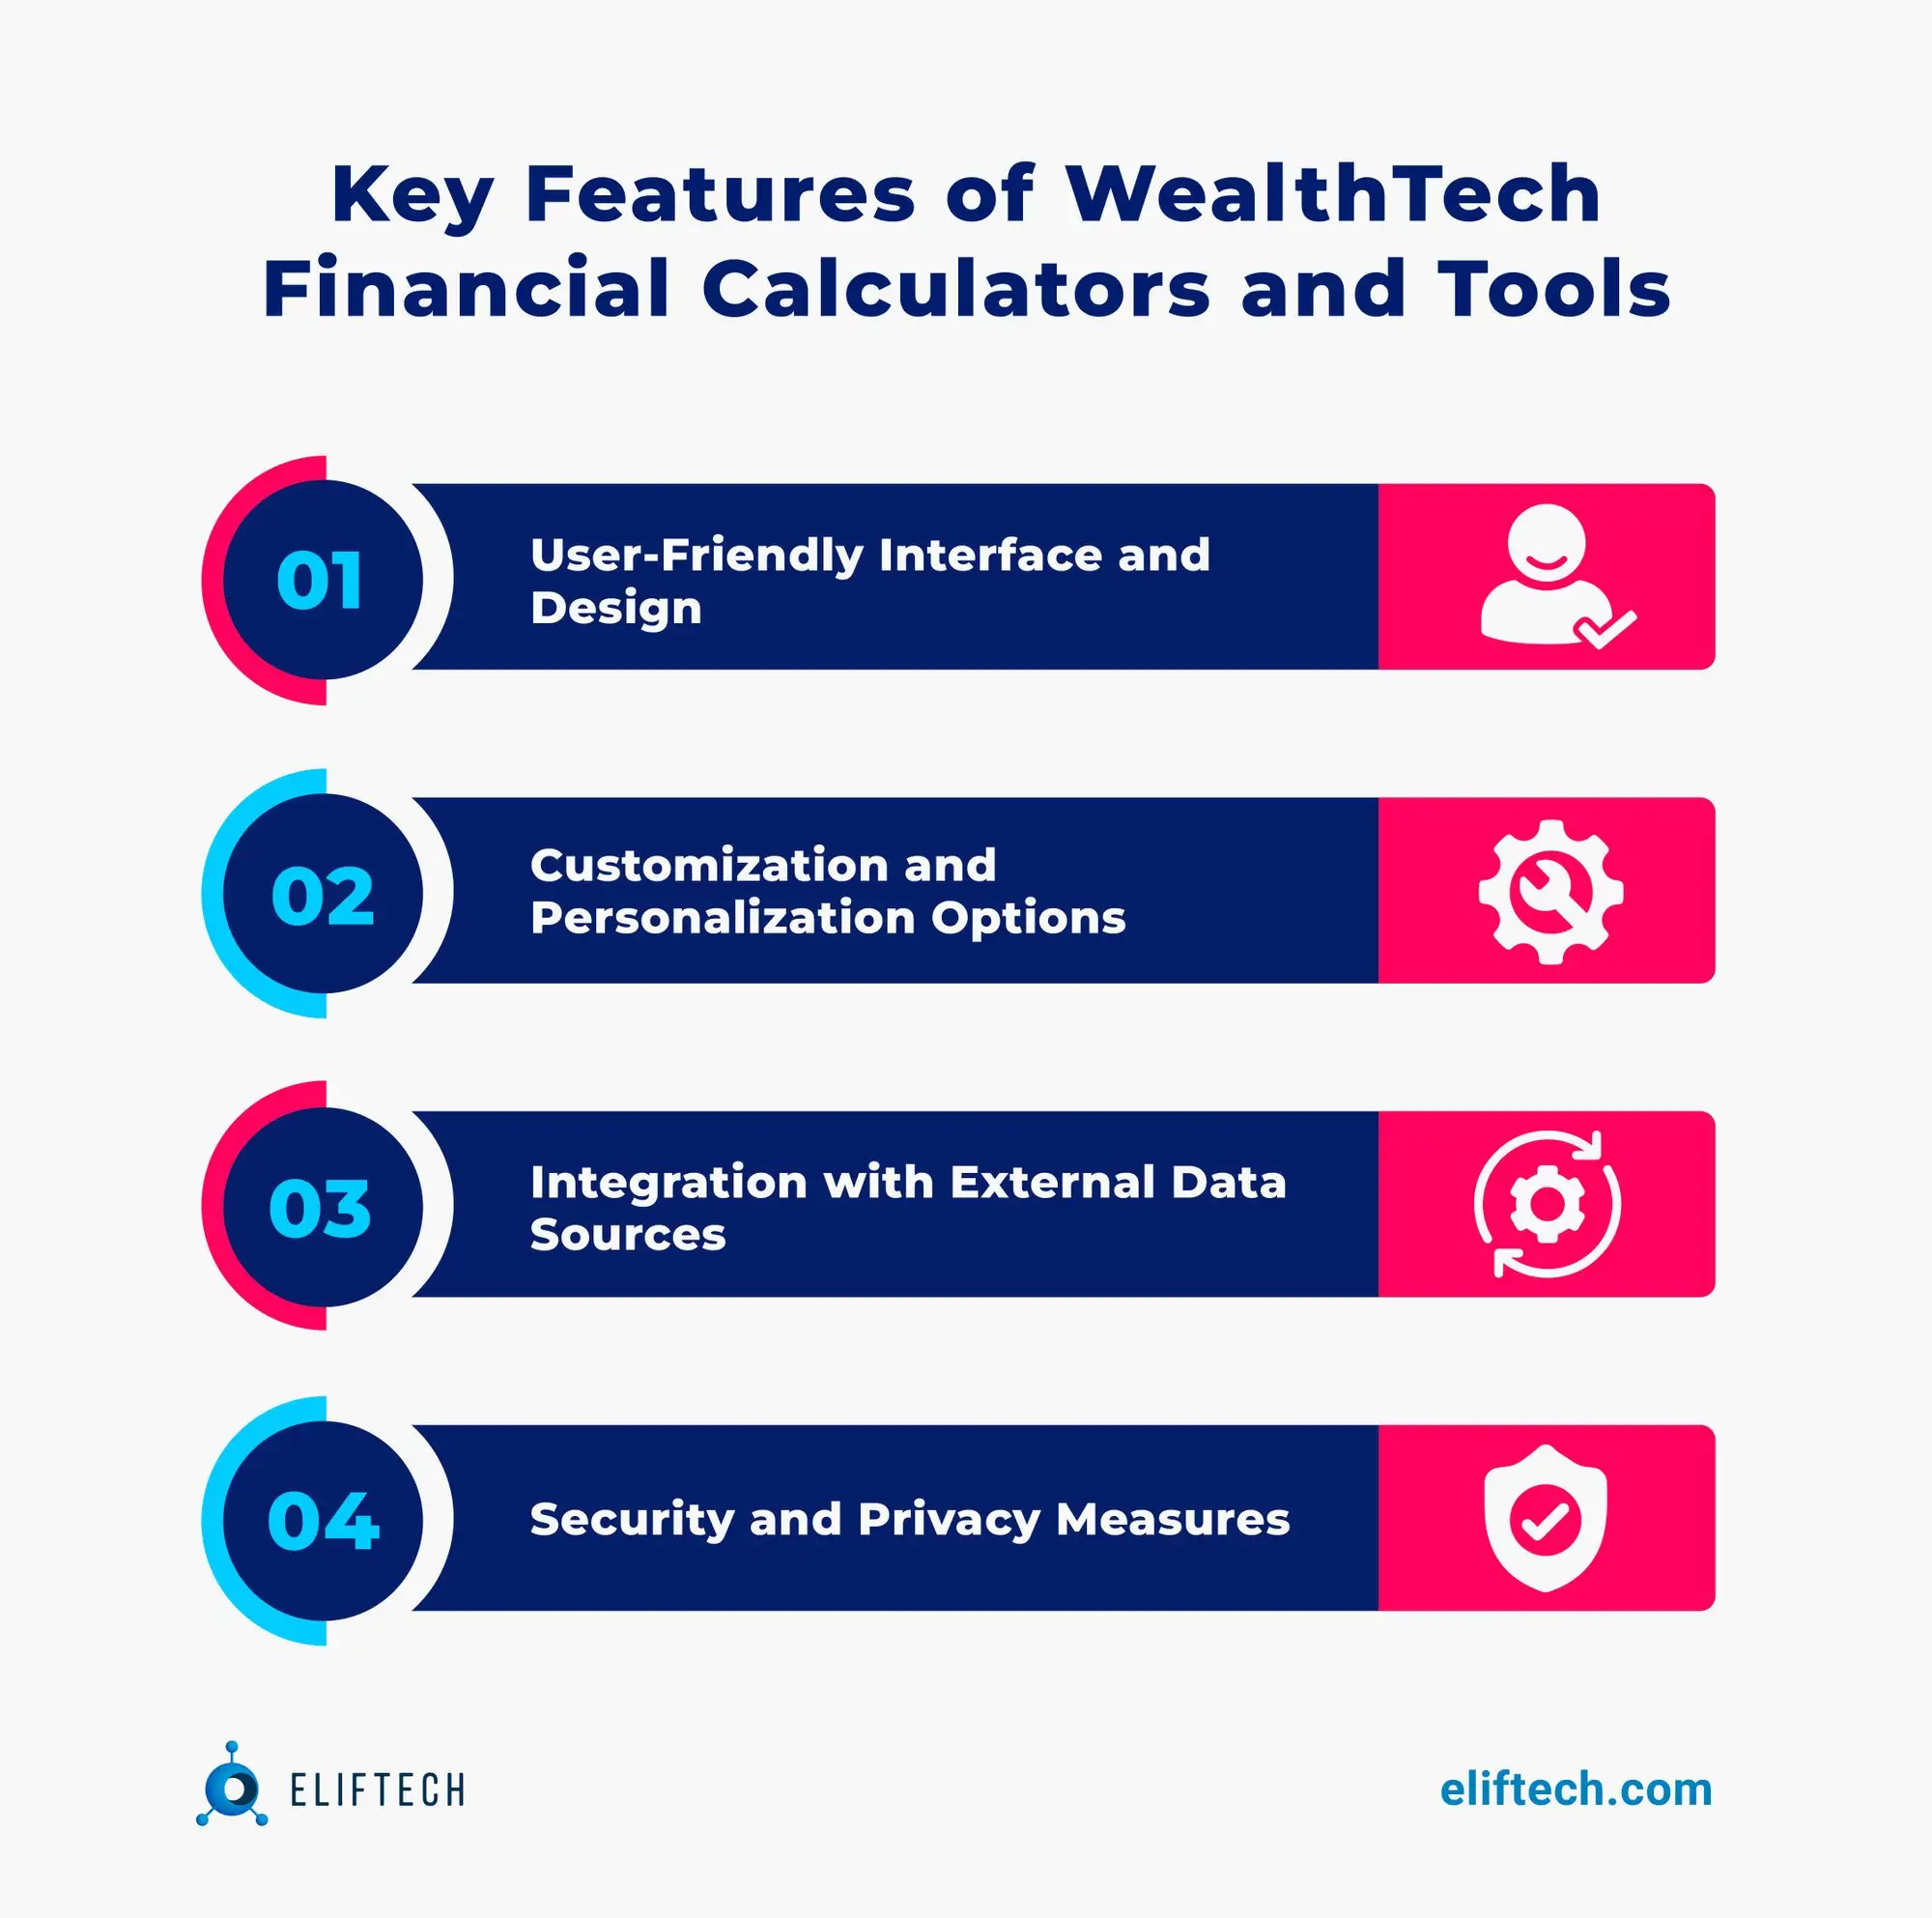 Key Features of WealthTech Financial Calculators and Tools